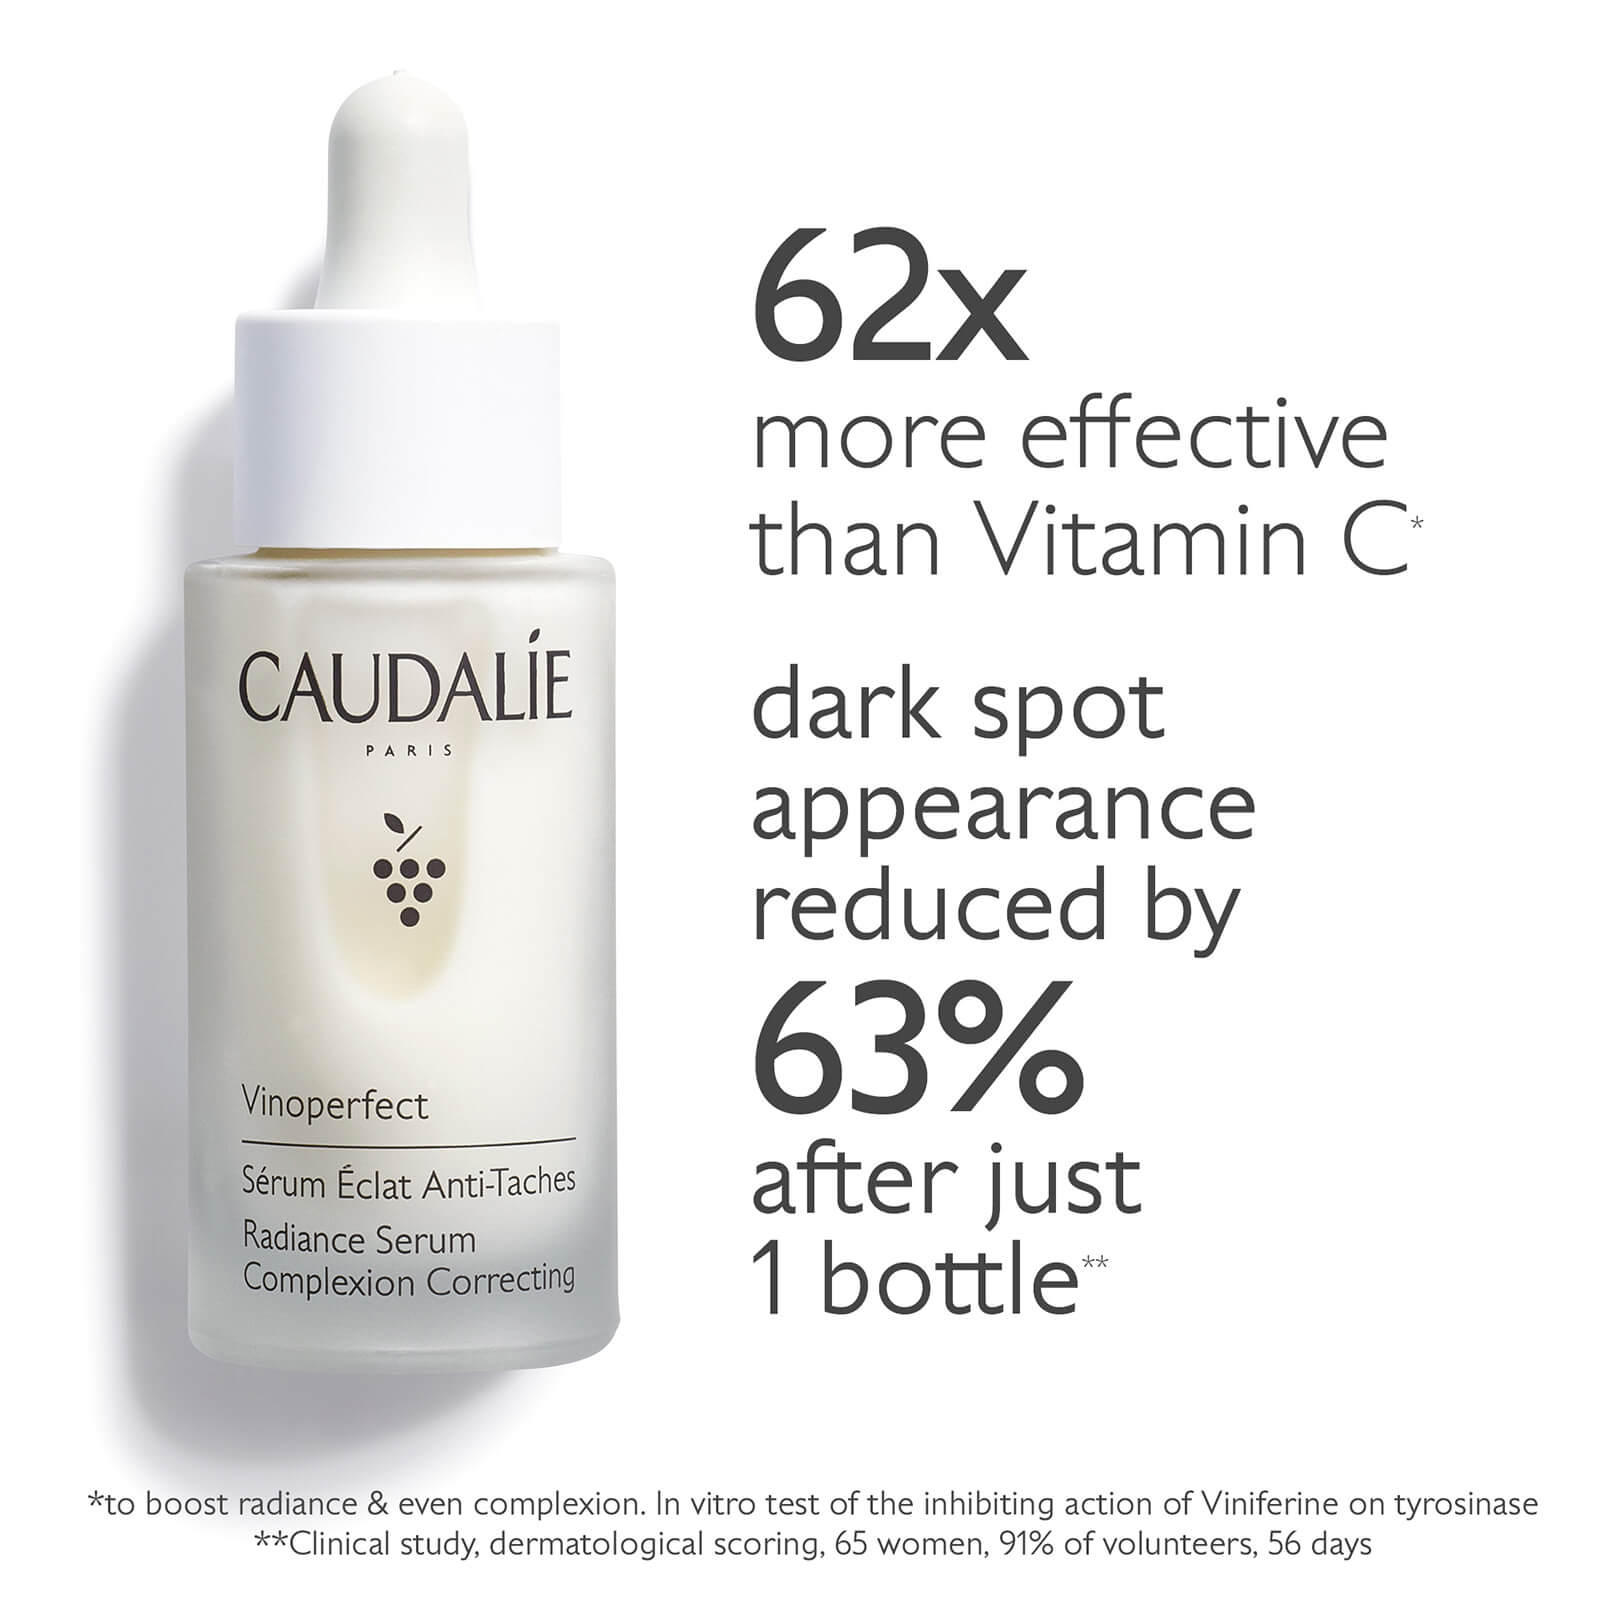 Image 1 -62x more effective than Vitamin C dark spot appearance reduced by 63% after just 1 bottle *to boost radiance & even complexion. In vitro test of the inhibiting action of Viniferine on tyrosinase **Clinical study, dermatological scoring, 65 women, 91% of volunteers, 56 days